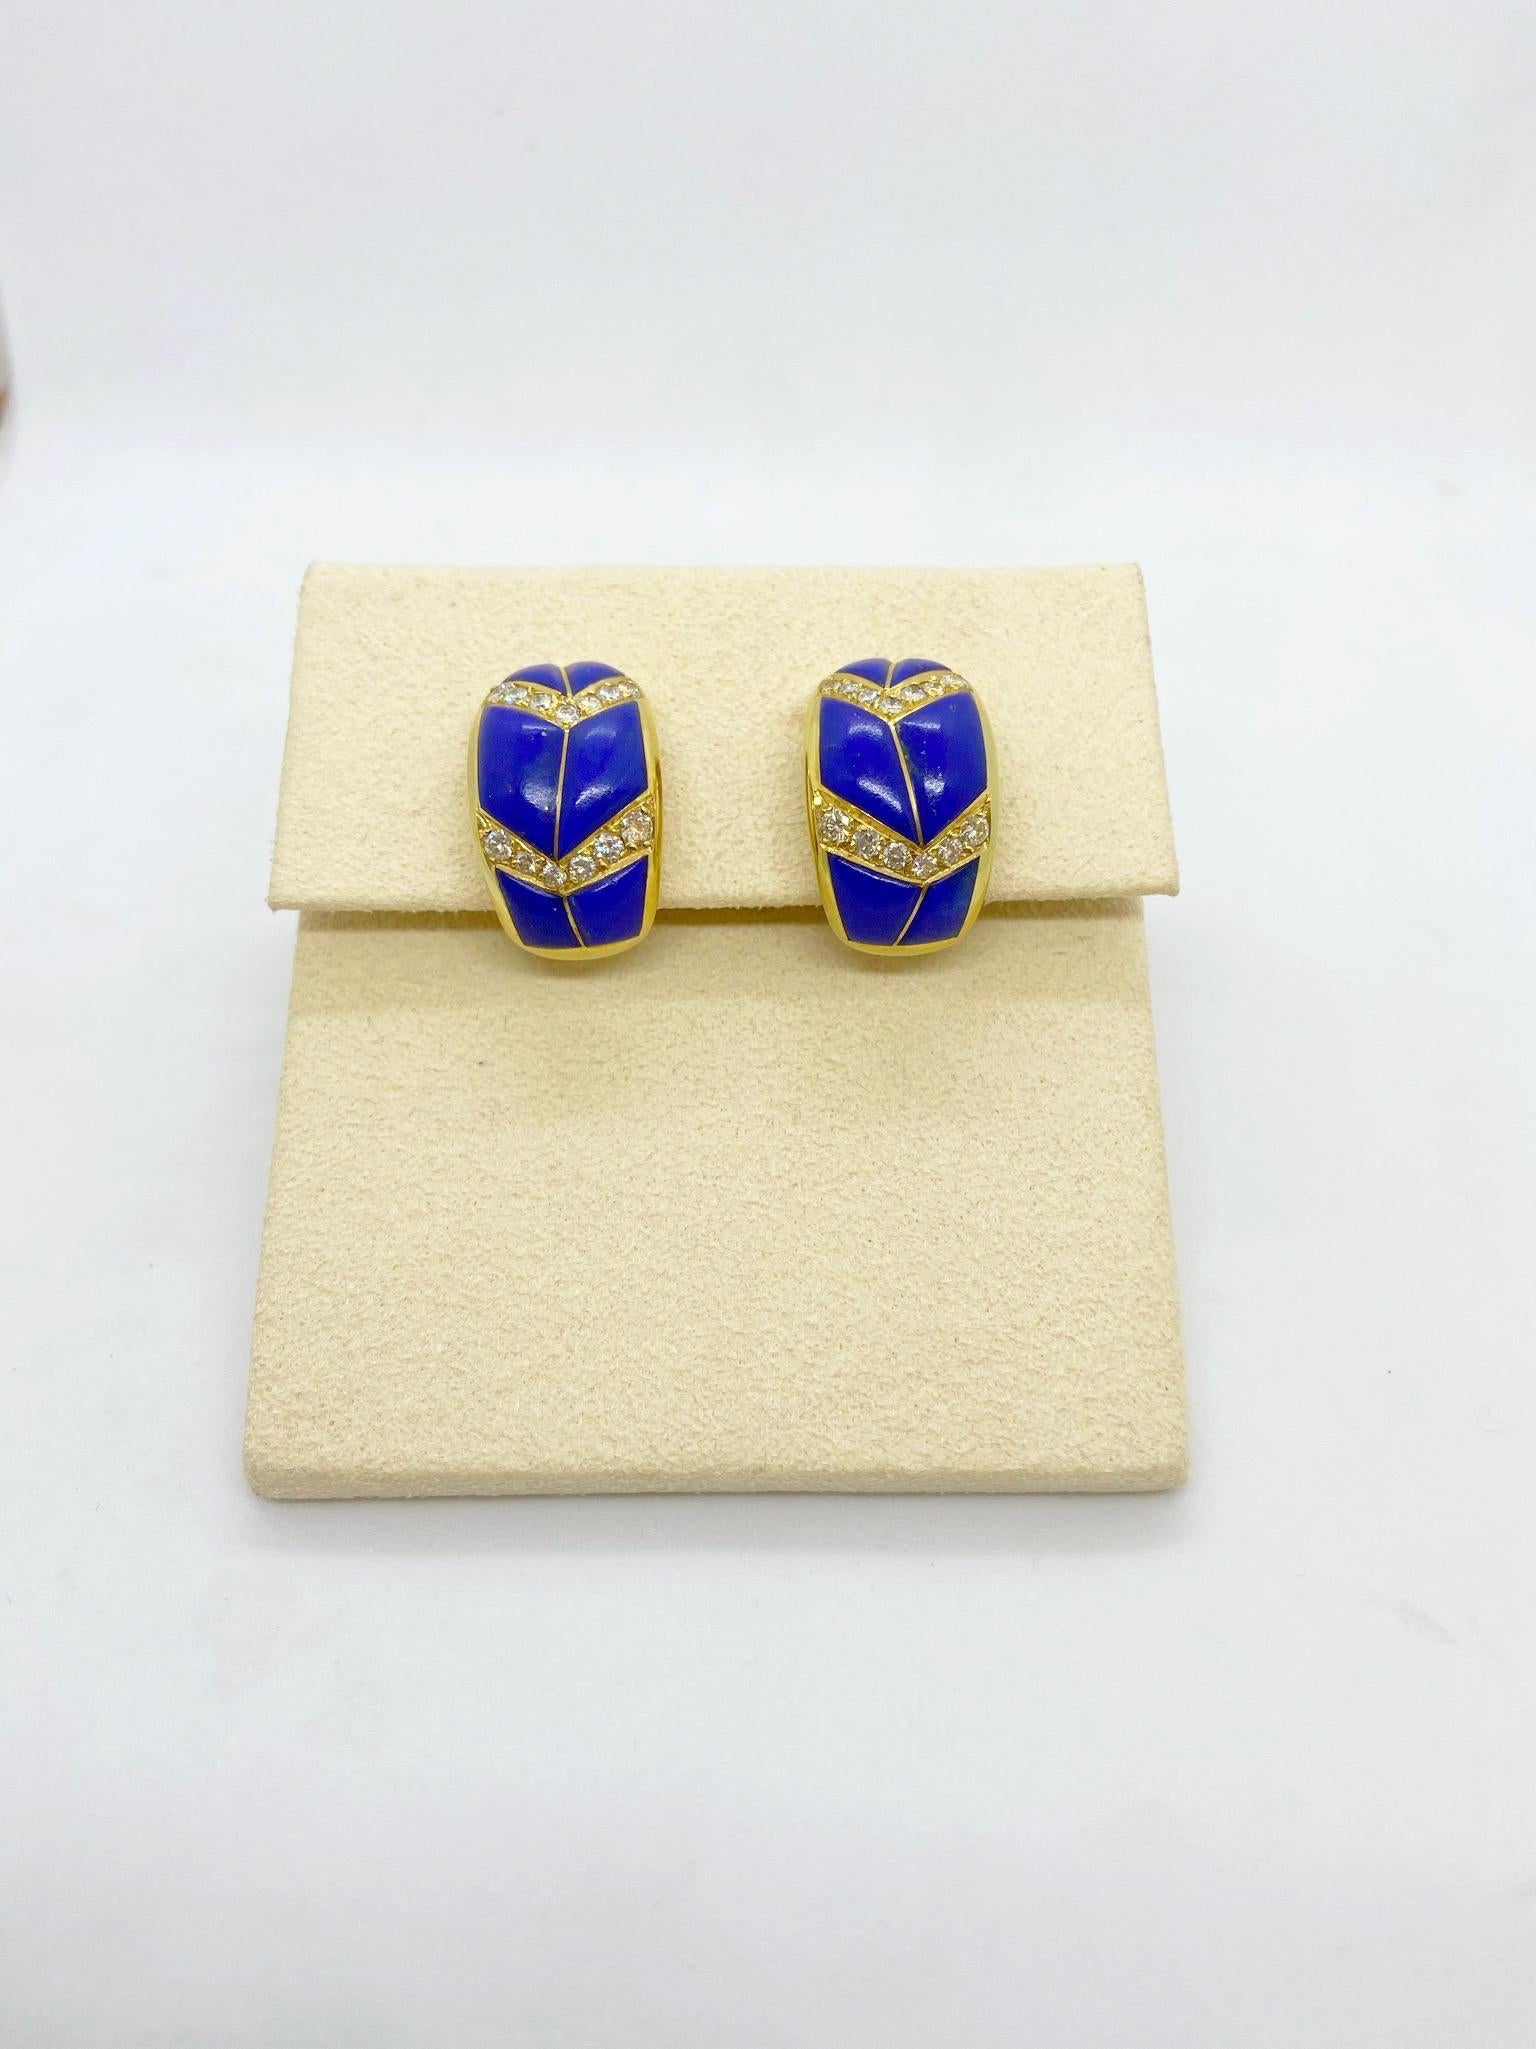 18 karat yellow gold  earrings set with round brilliant diamonds and sections of lapis lazuli. The earrings measure 1